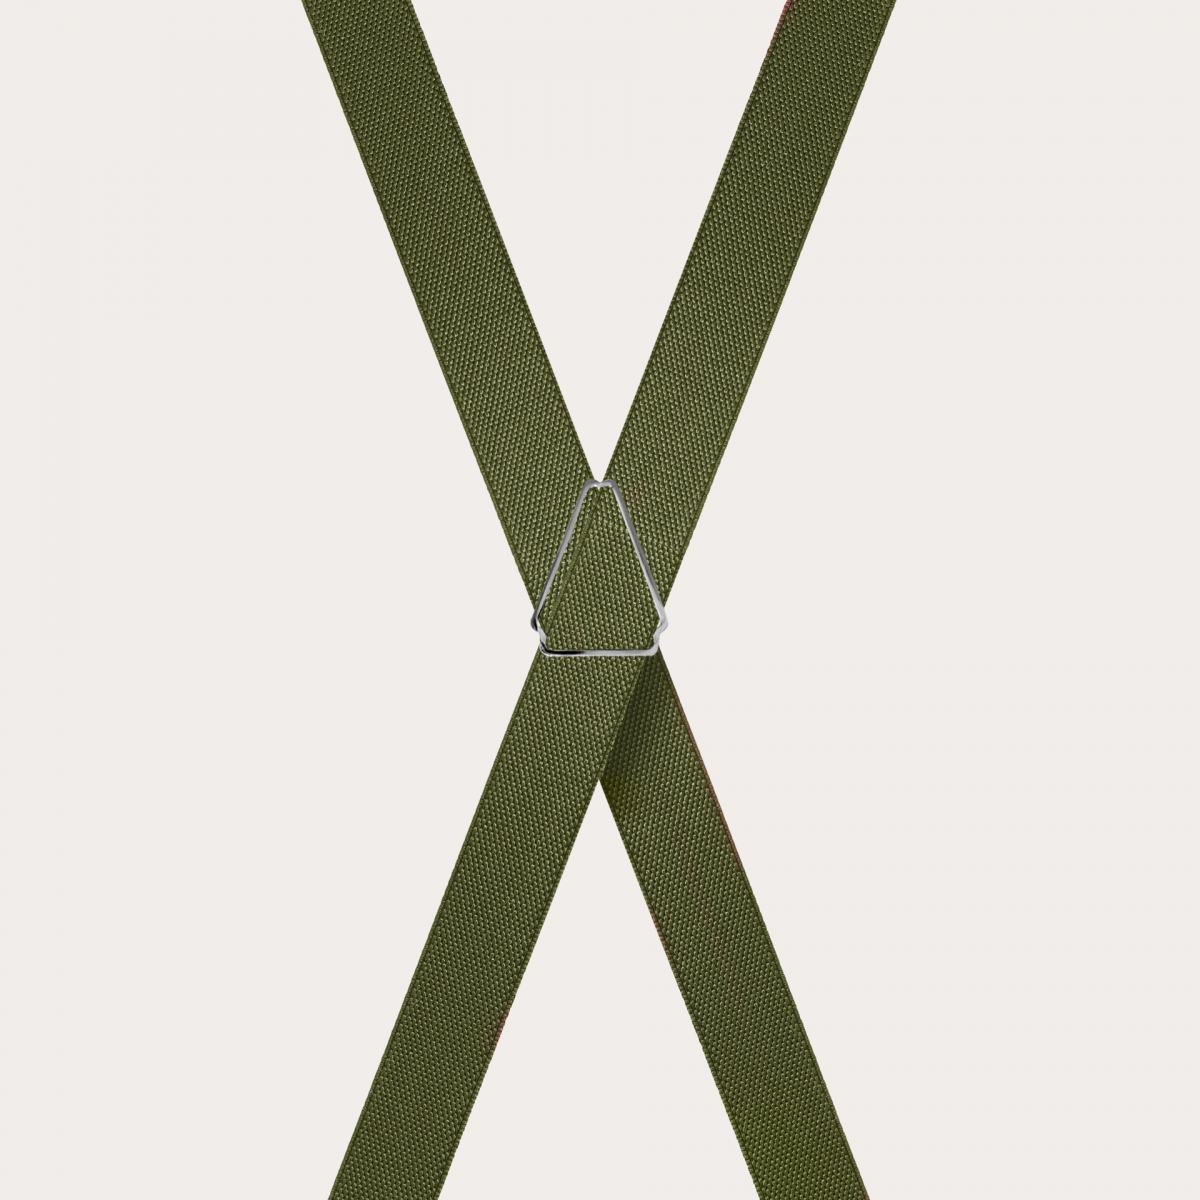 BRUCLE Unisex X-shaped suspenders for children and teenagers, military green